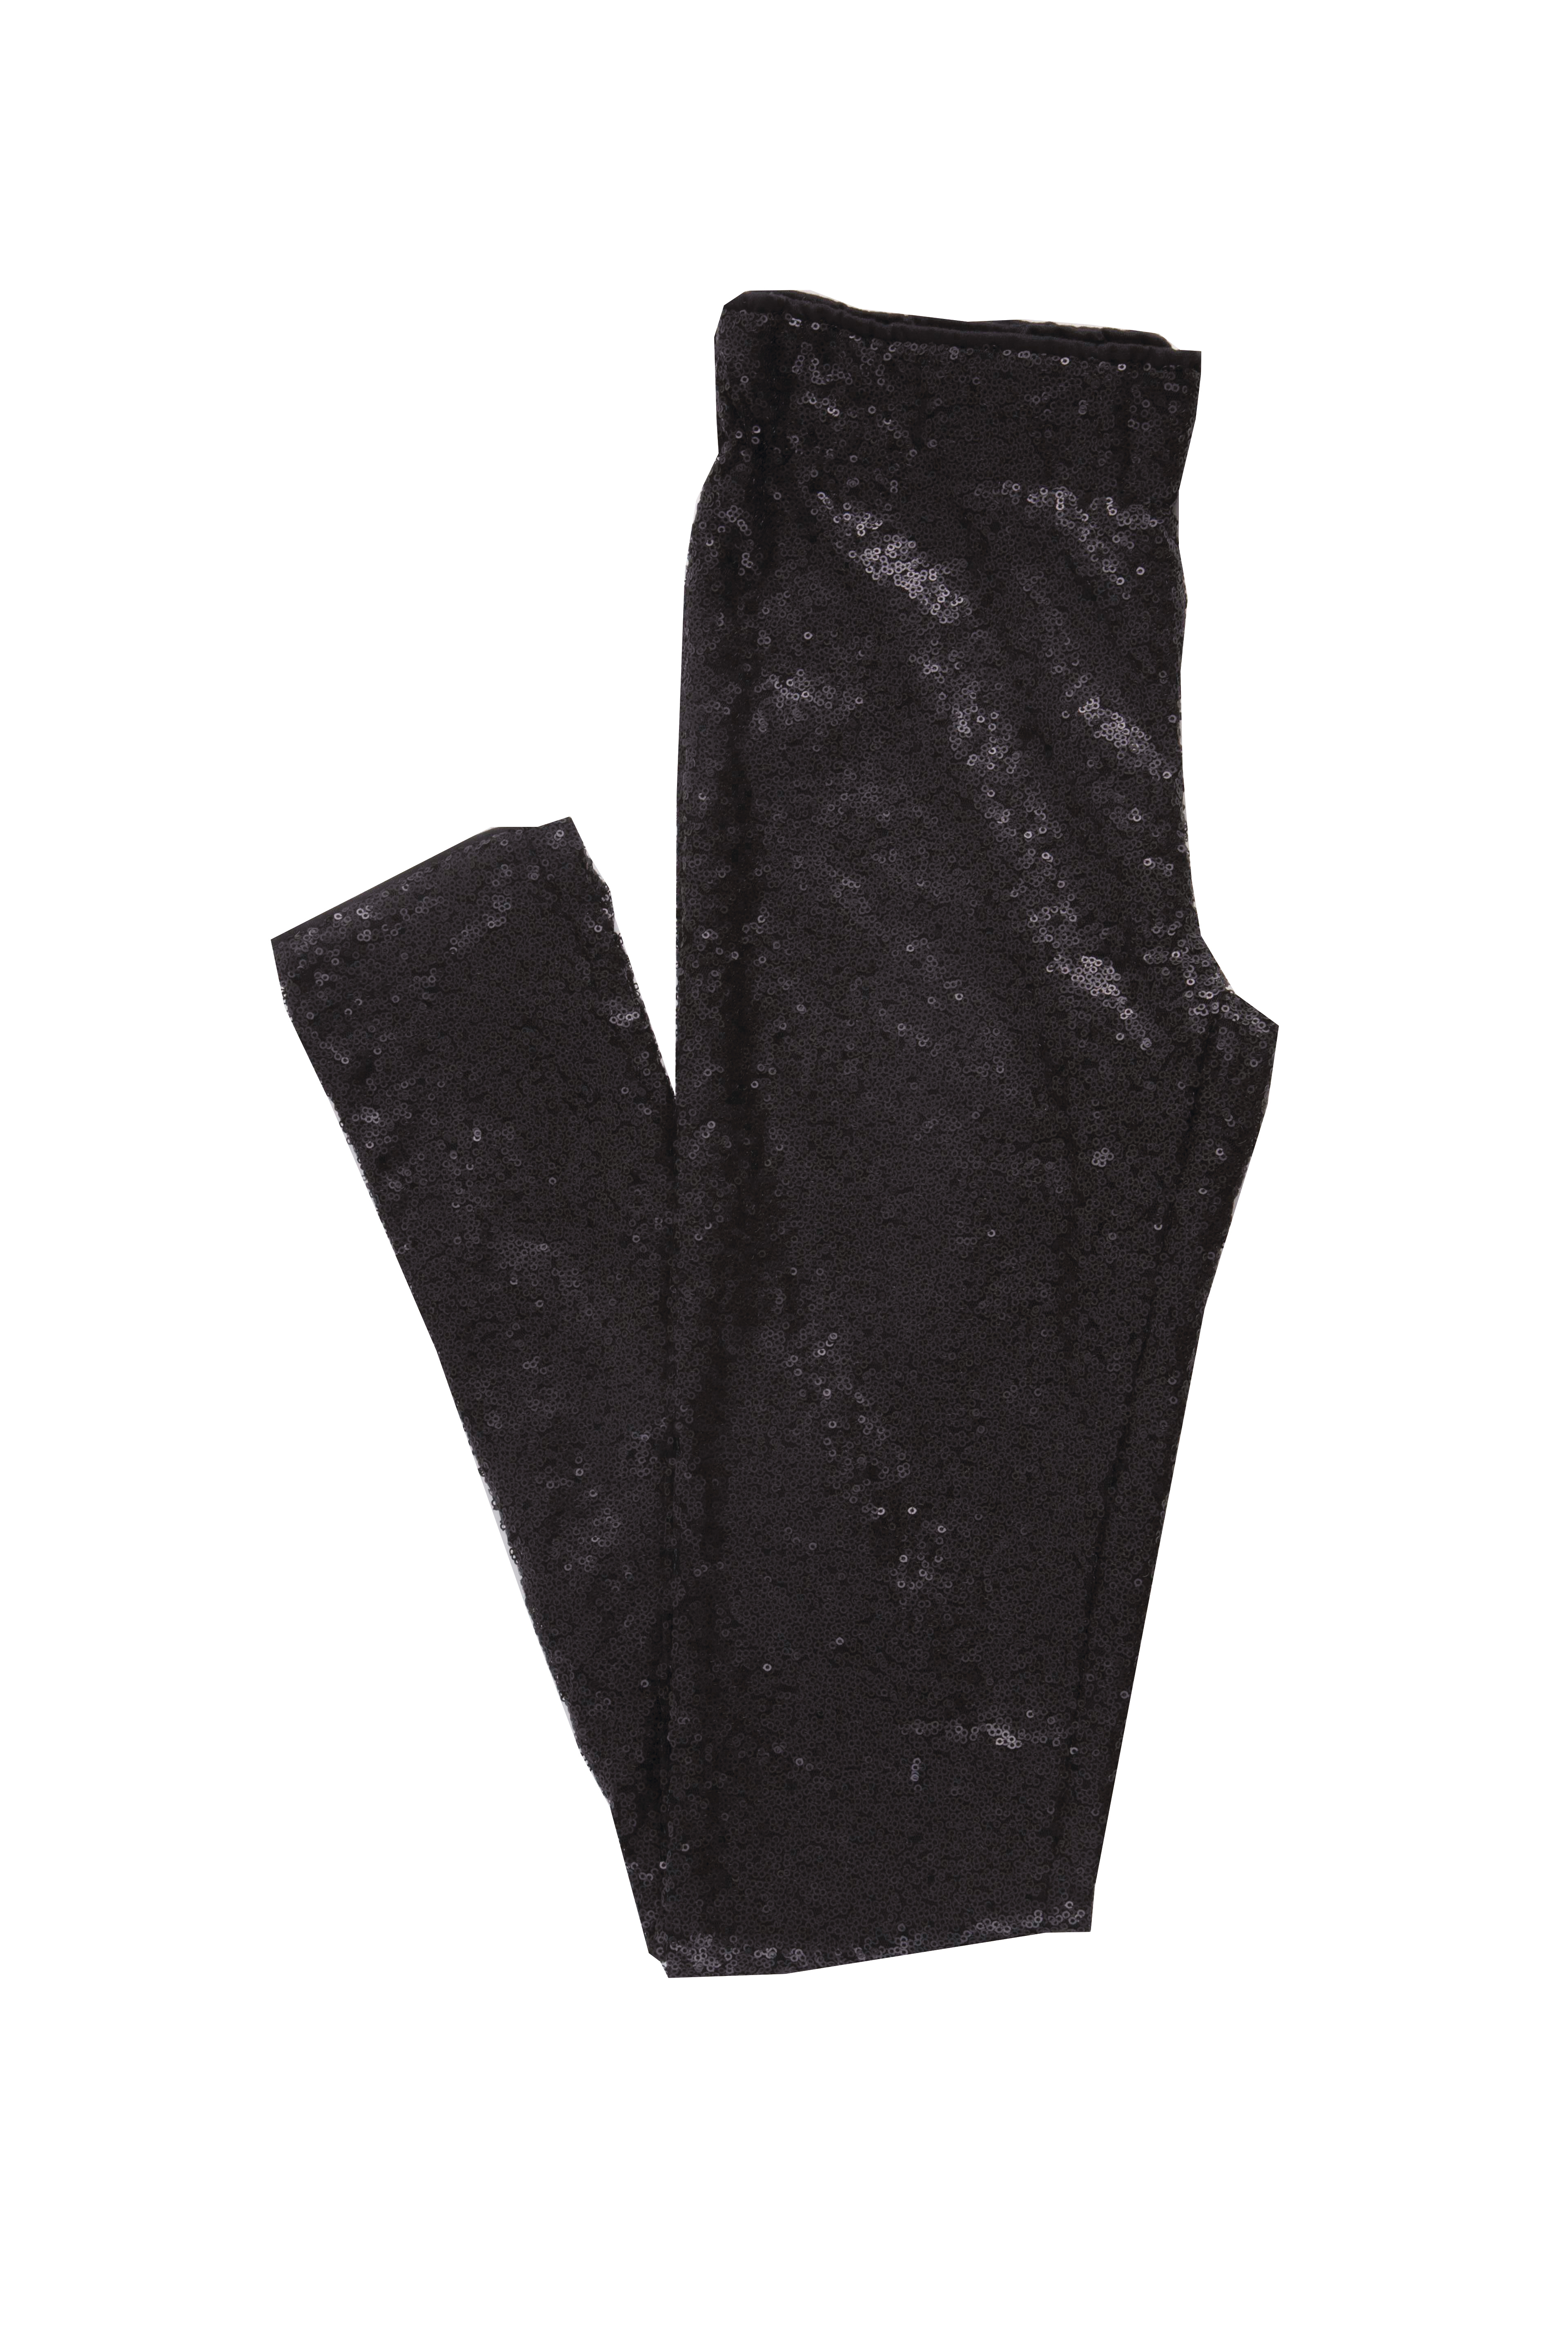 May &amp; June ”Sequin Leggings,” $38 at Out of Hand